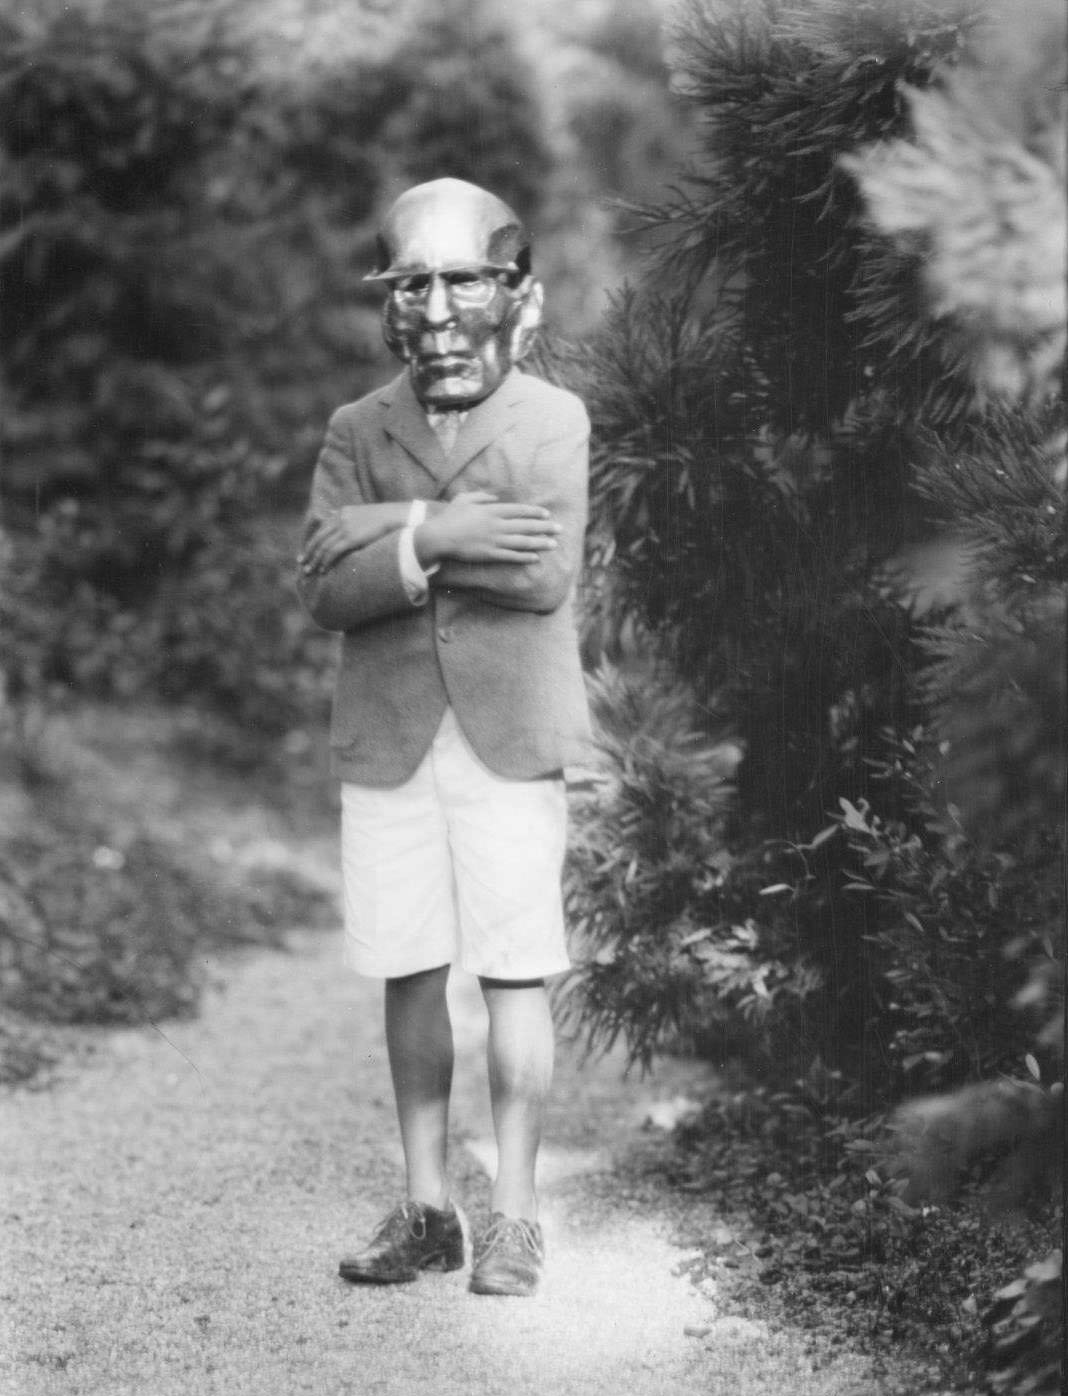 Wladysław Benda: The Talented Mask Maker from the Early 20th Century